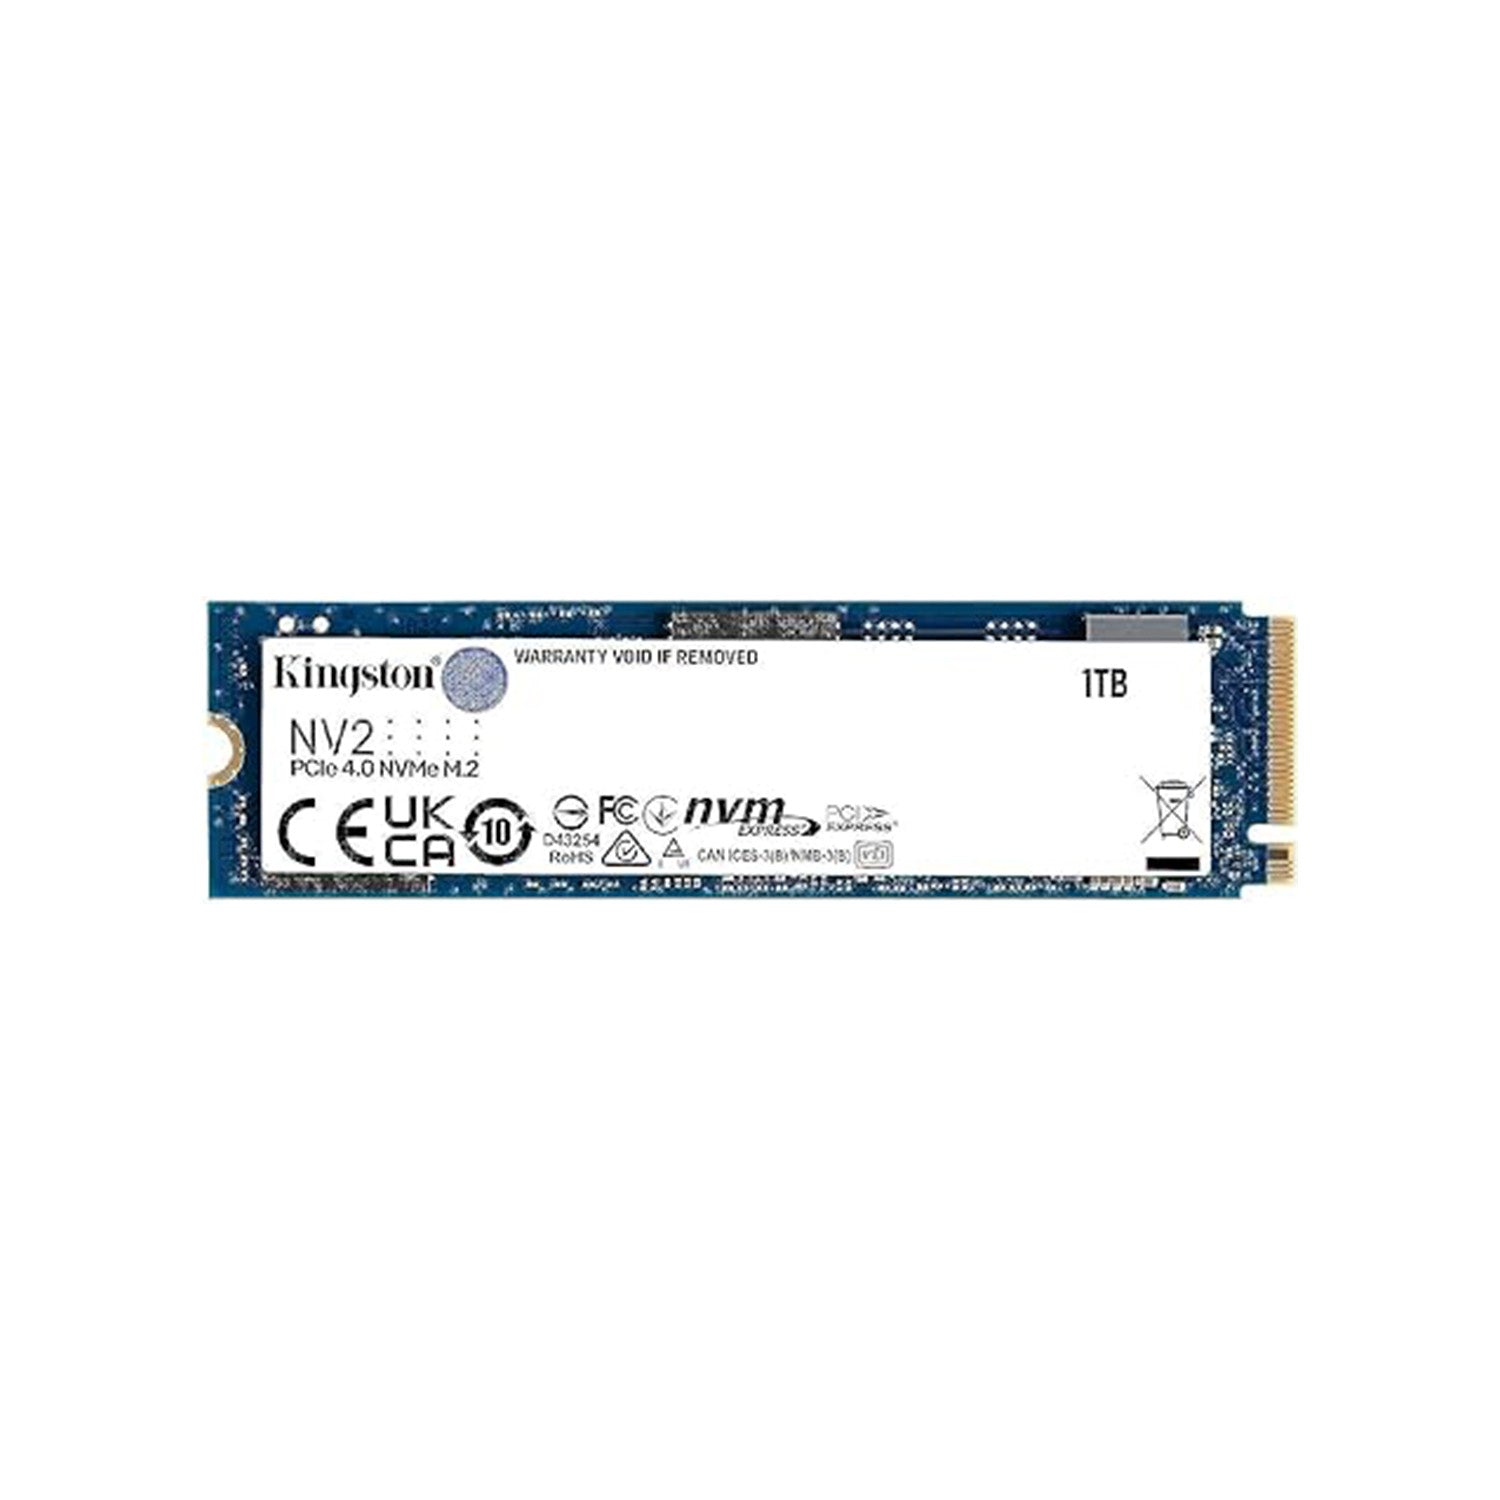 Kingston NV2 1TB M.2 2280 NVMe (Solid State Drive) - High-Performance Storage PCIe 4.0 Internal SSD for Desktop and Laptop Up to 2100 MB/s (SNV2S/1000G)